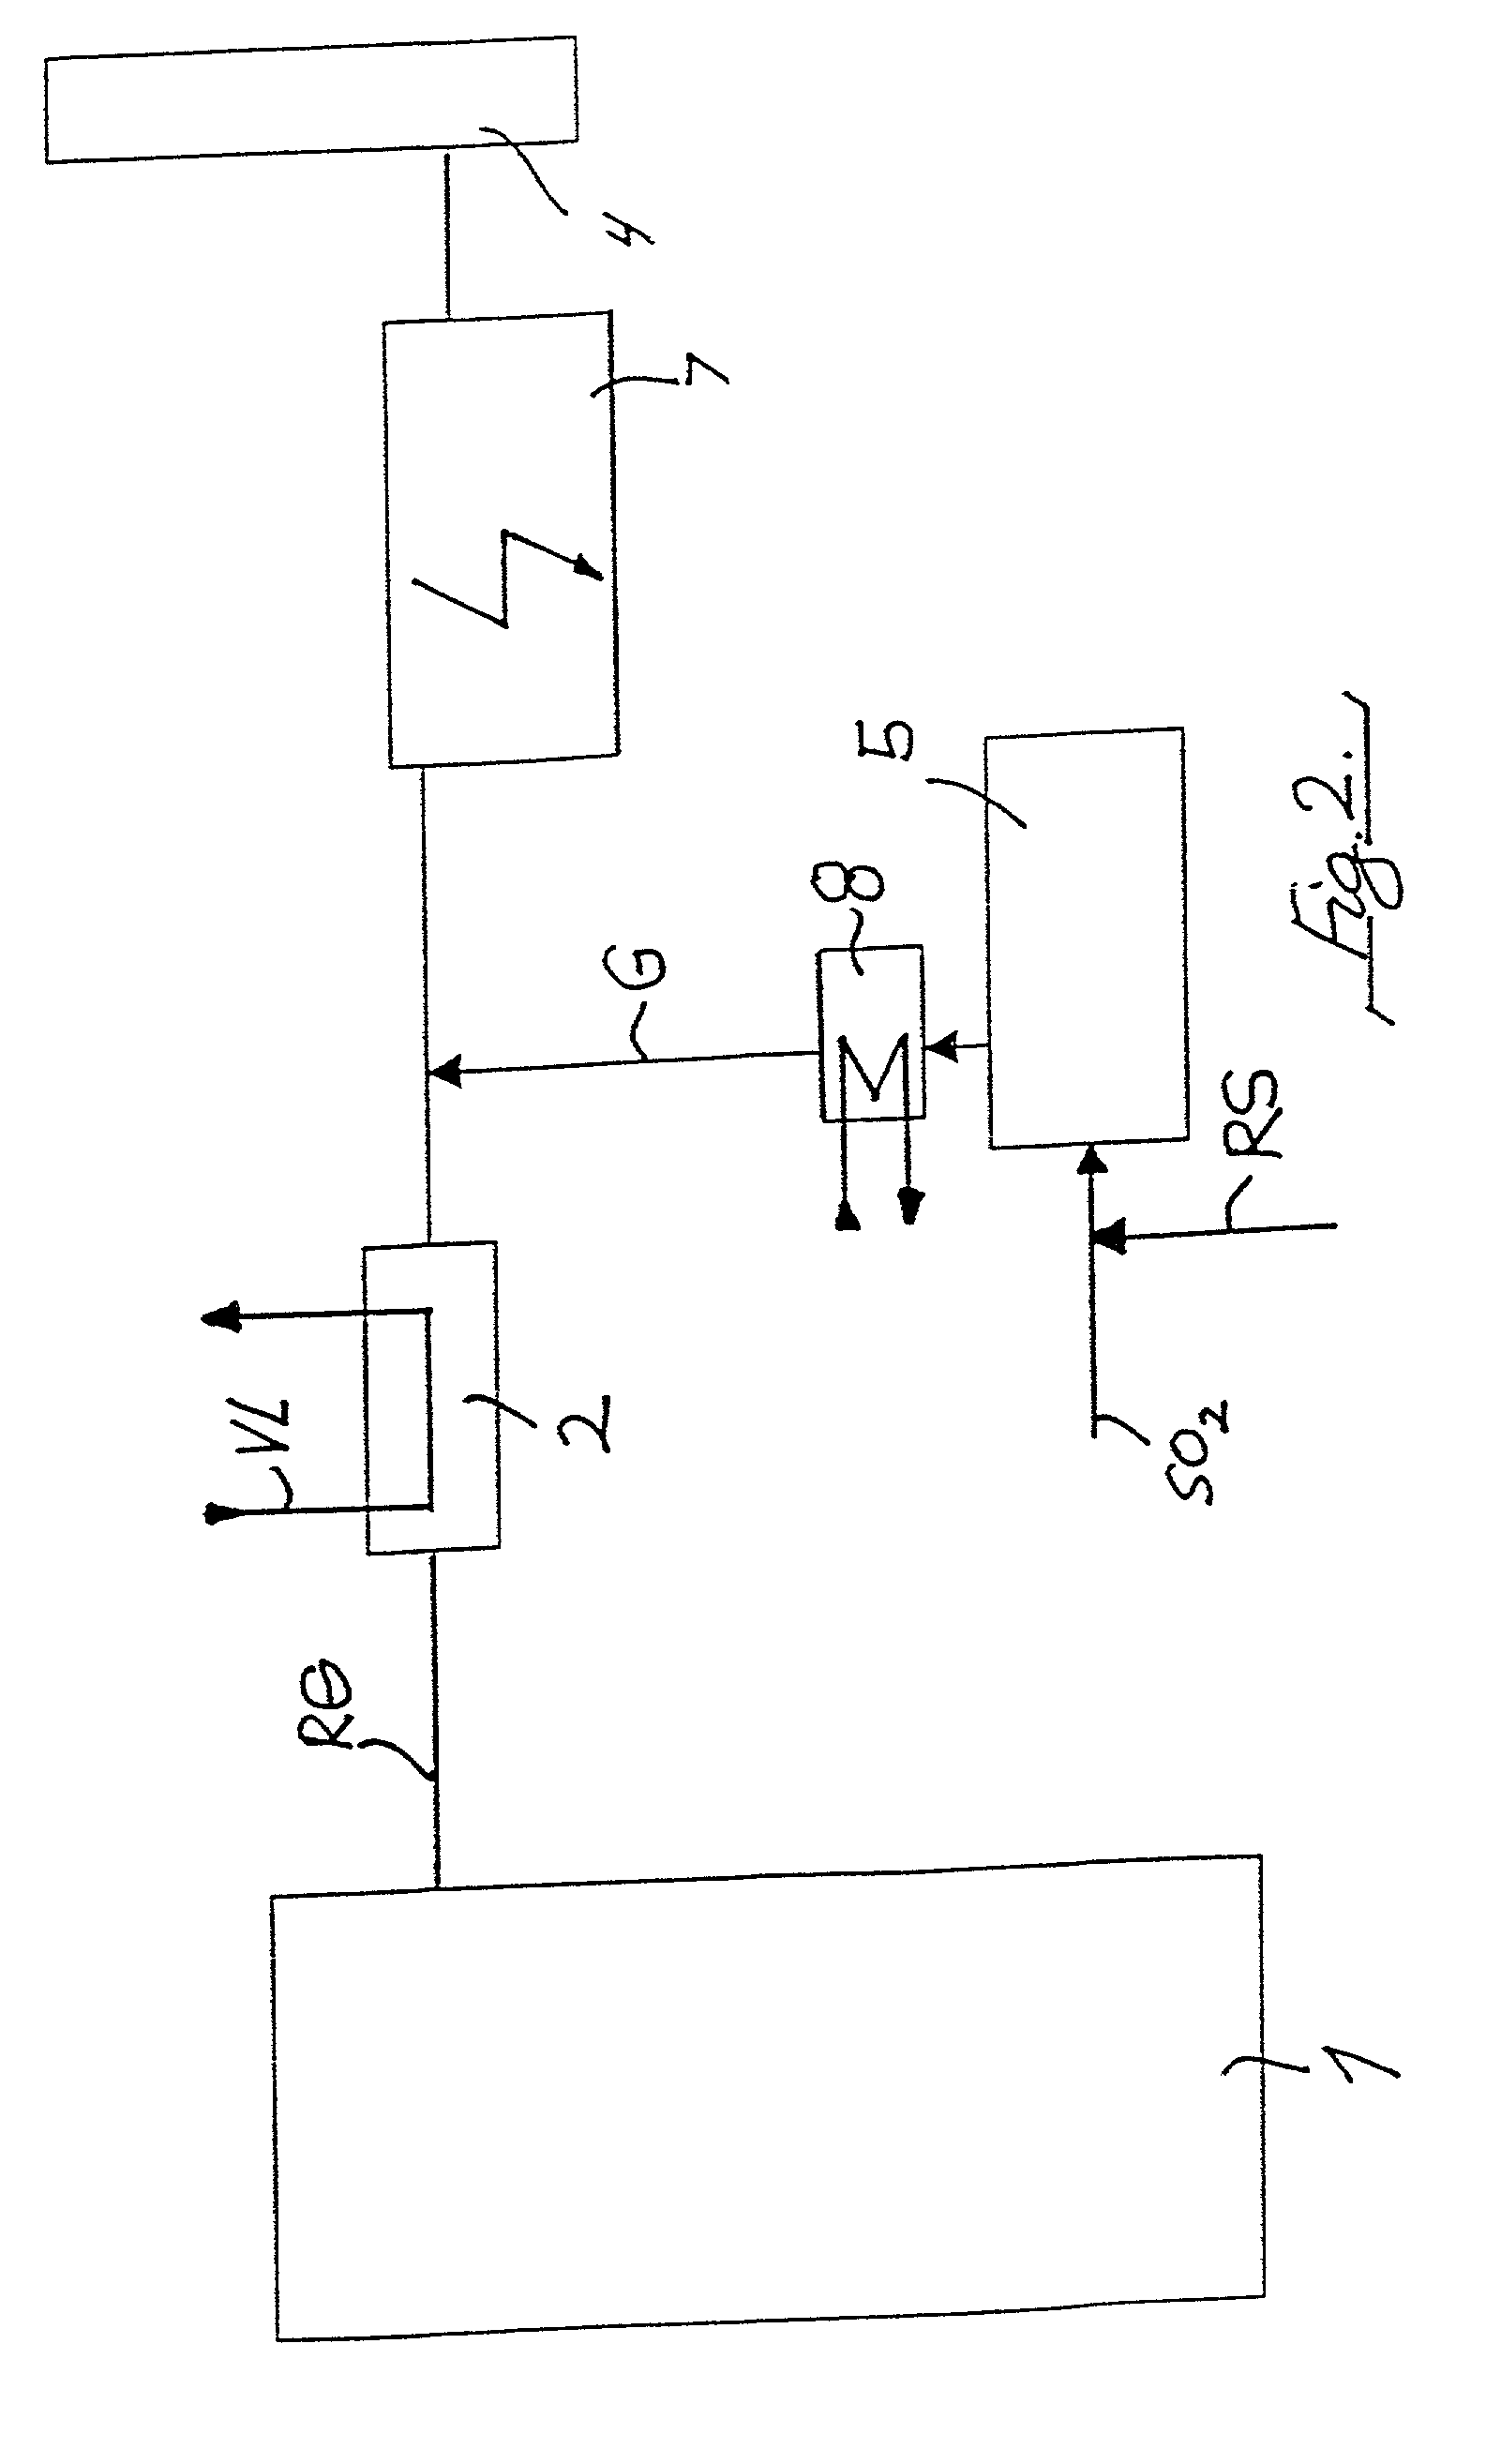 Method of removing mercury from flue gases